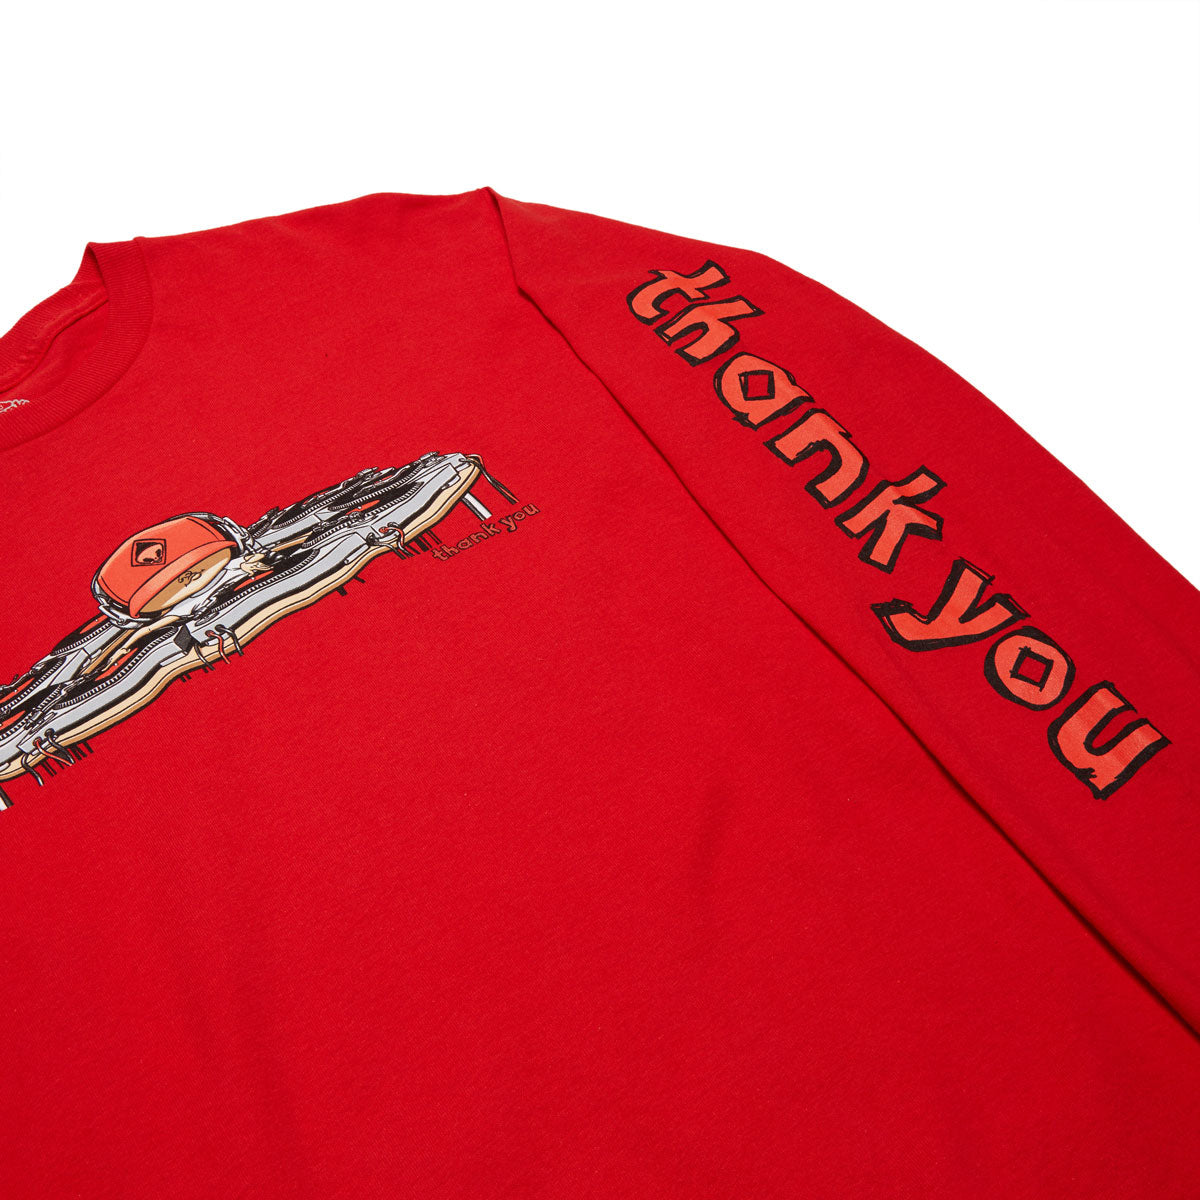 Thank You x Ronnie Creager Mix Master Long Sleeve T-Shirt - Red image 2